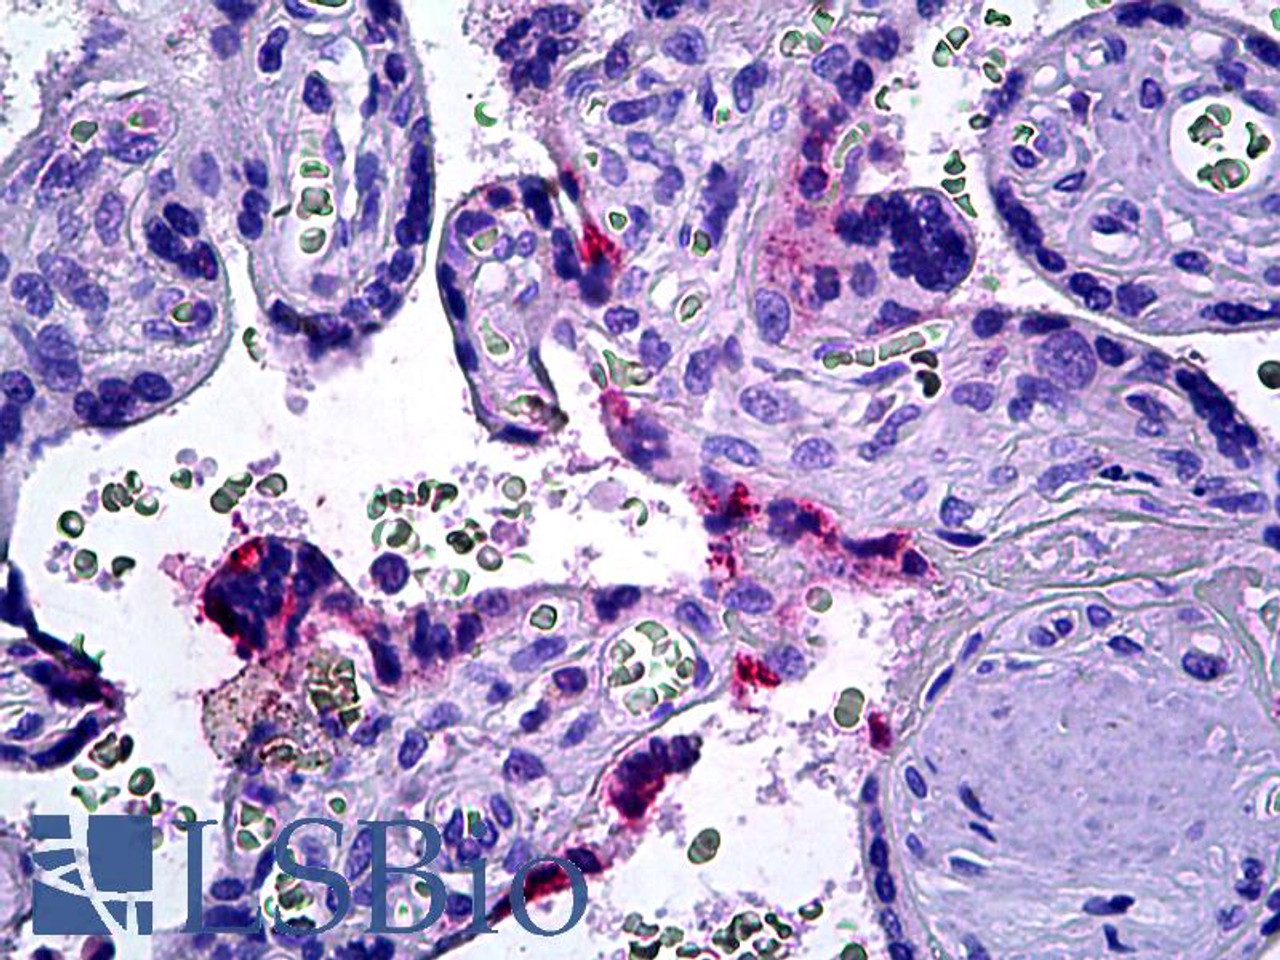 45-490 (6.125ug/ml) staining of paraffin embedded Human Placenta. Steamed antigen retrieval with citrate buffer pH 6, AP-staining.<strong>This data is from a previous batch, not on sale.</strong>